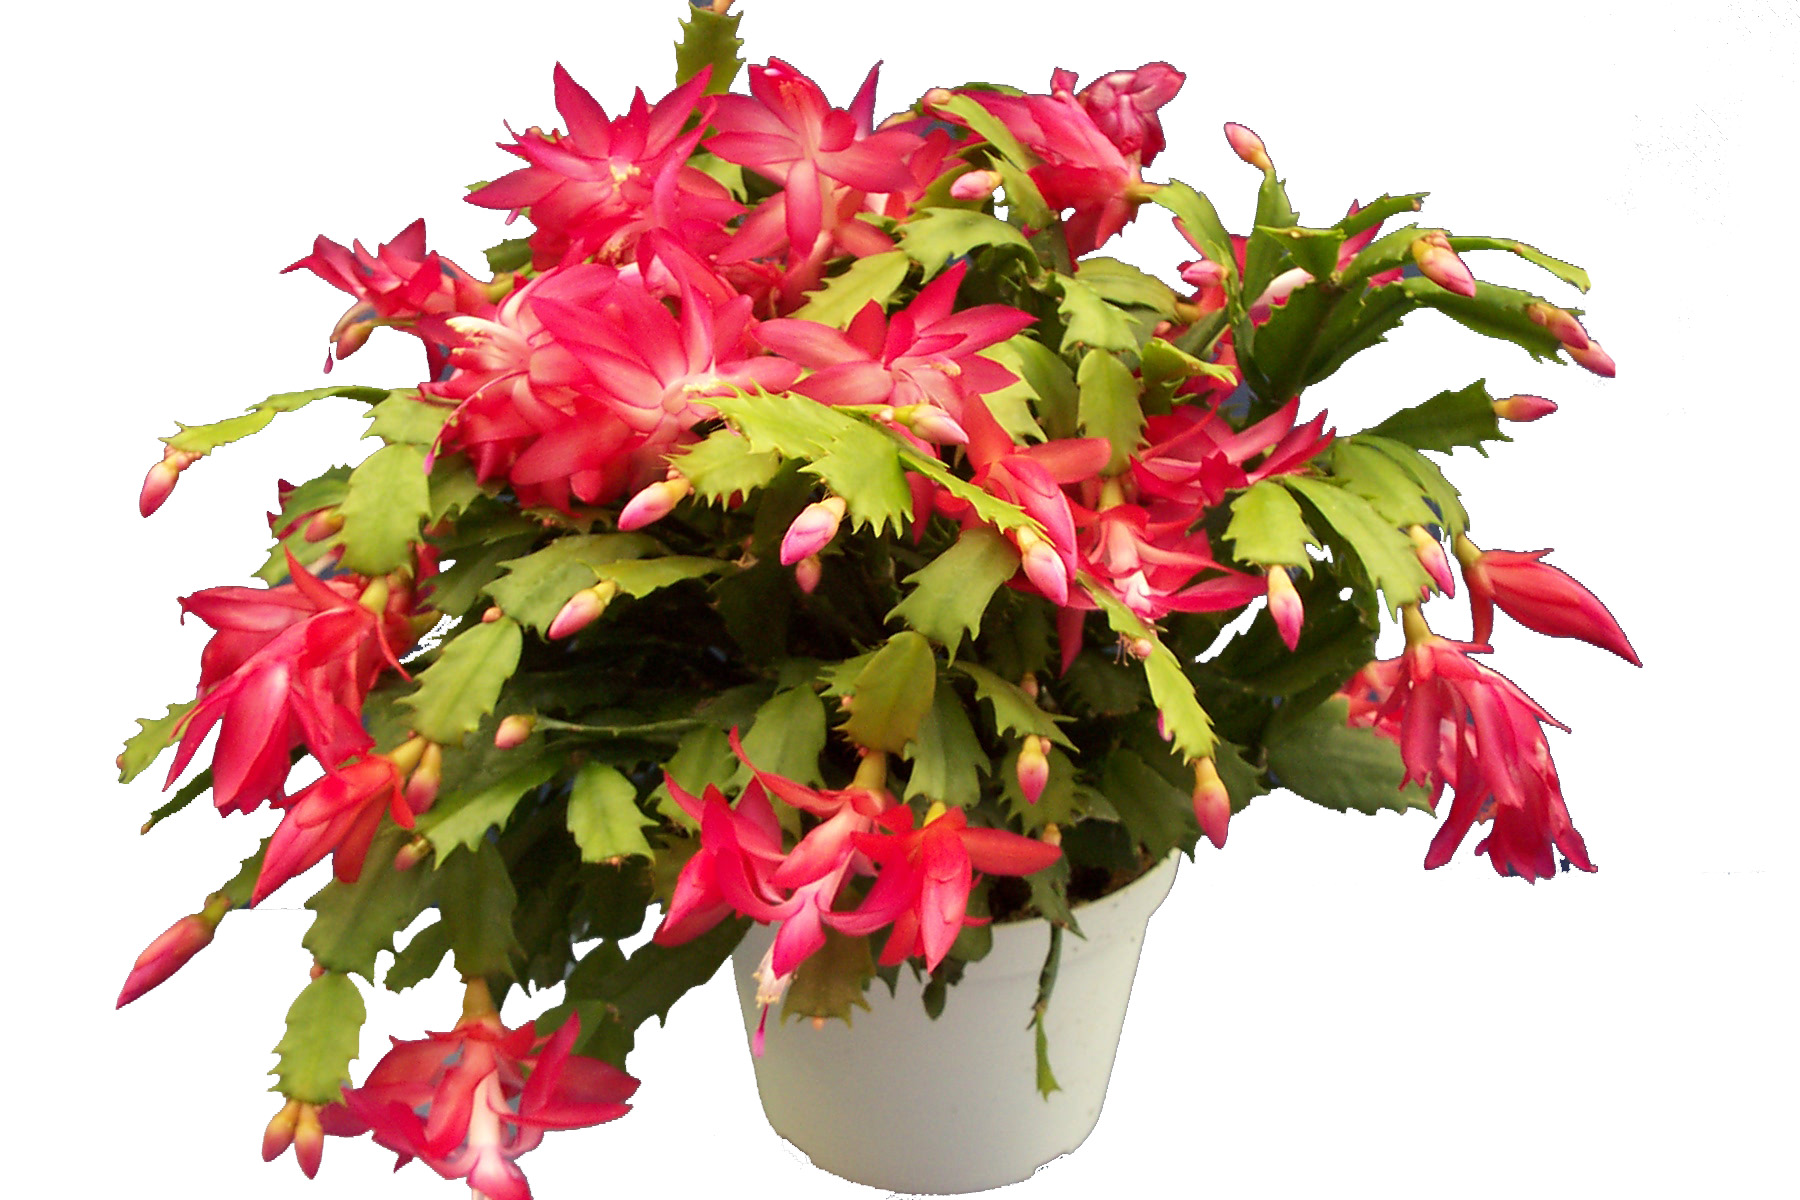 A beautiful Christmas cactus has become something of an heirloom for many families, with the plant being passed down through the ages.